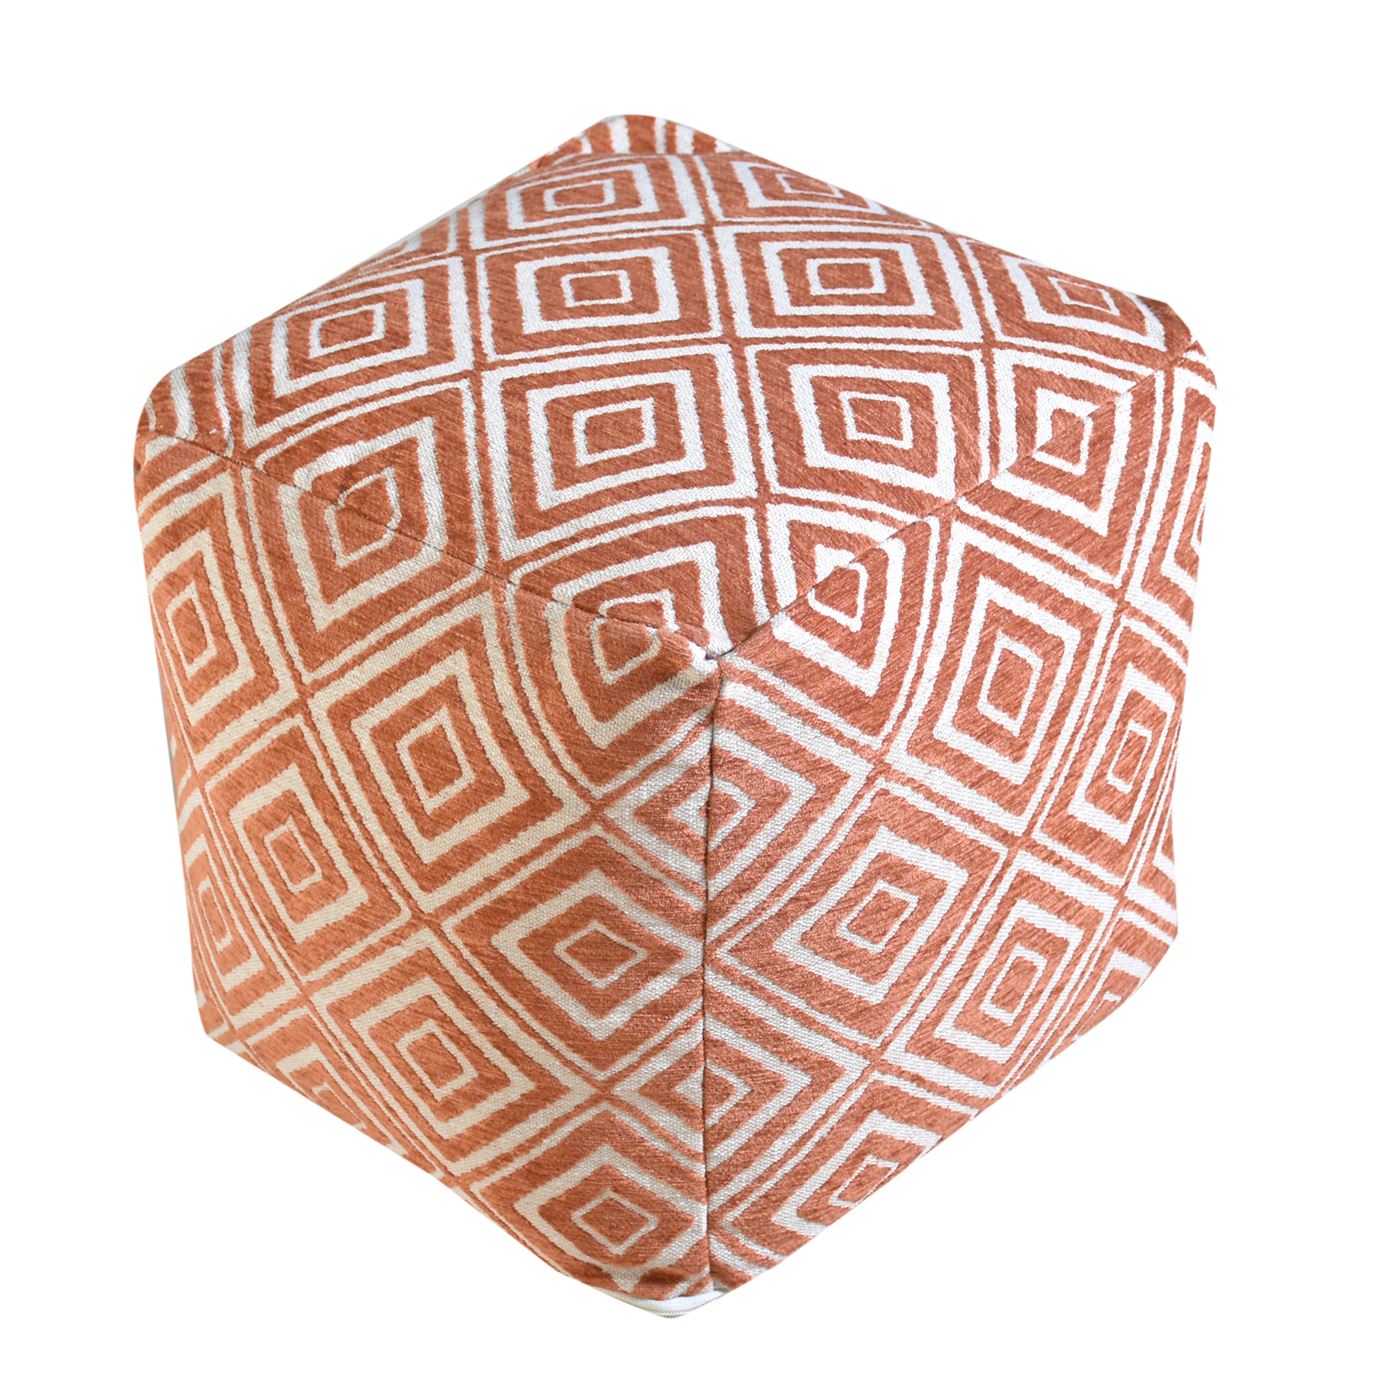 Dauria Pouf, Cotton, Acrylic, Polyester, Terra, Jaquard Durry, Flat Weave